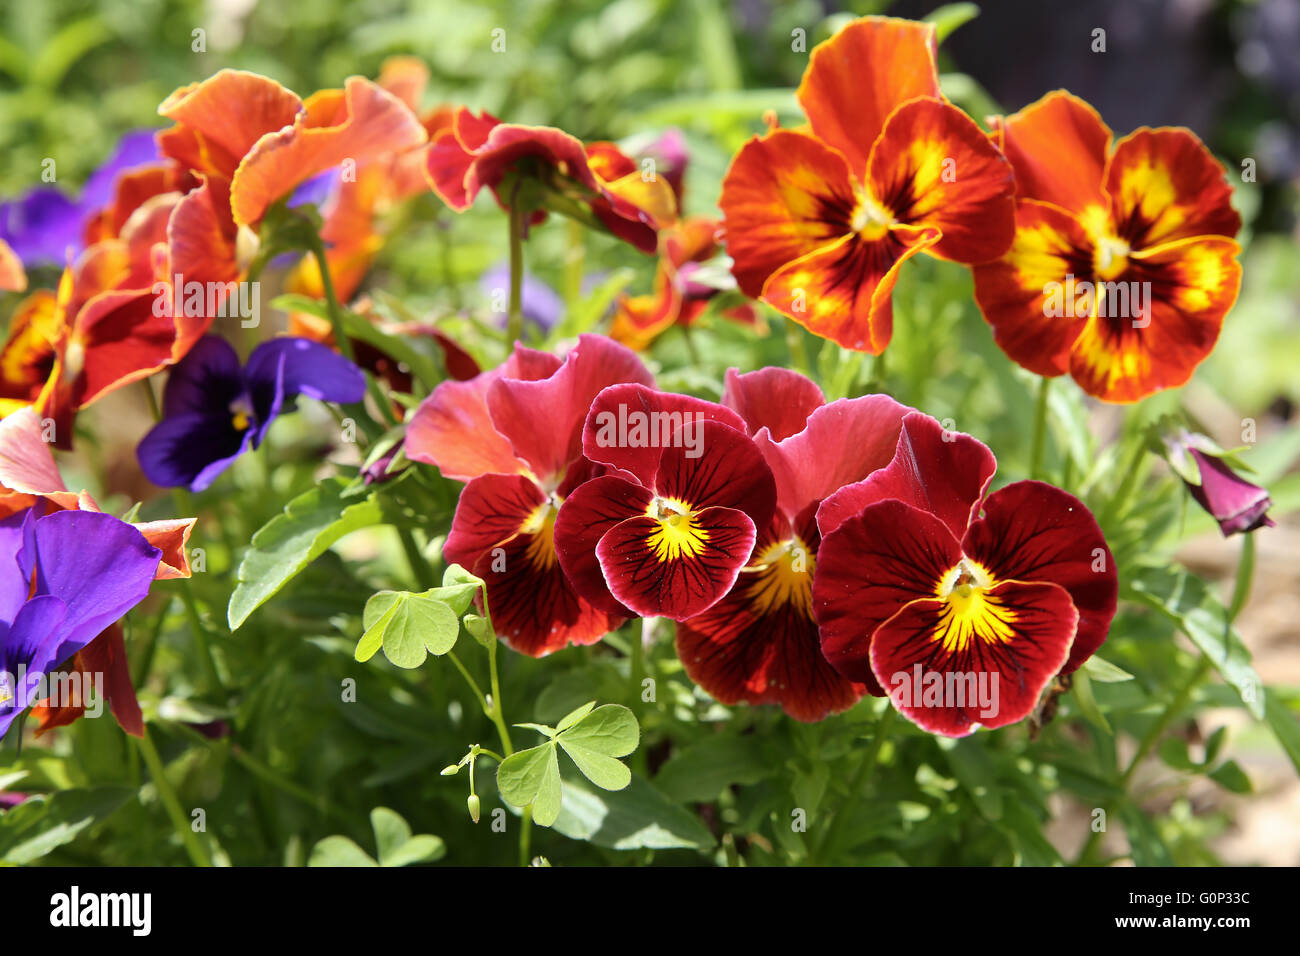 Mixed organic colorful pansy viola flowers in garden, selective focus Stock Photo